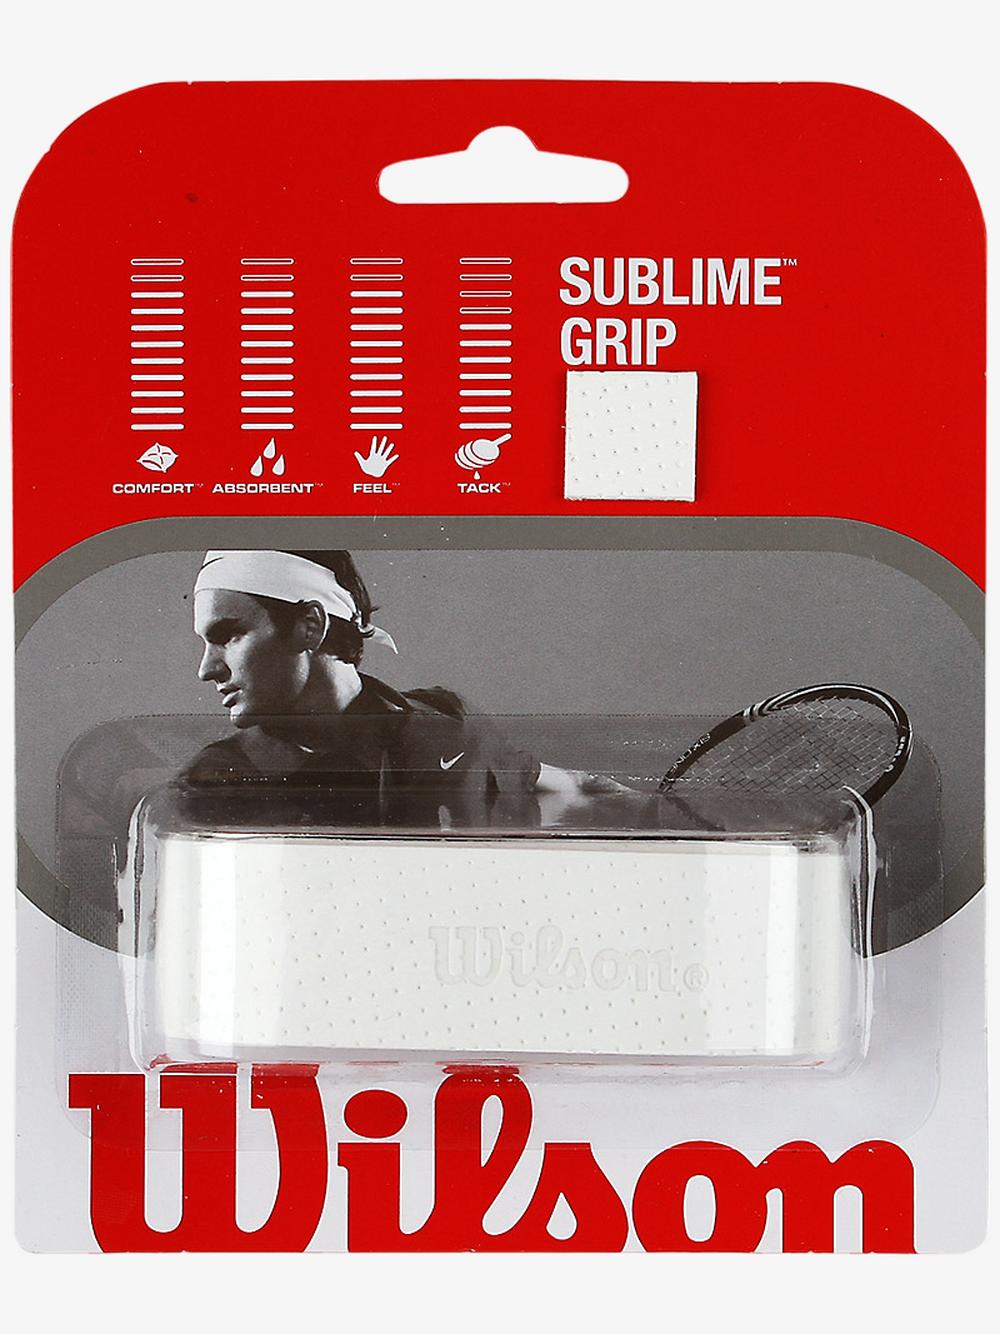 Wilson Sublime Replacement Grip